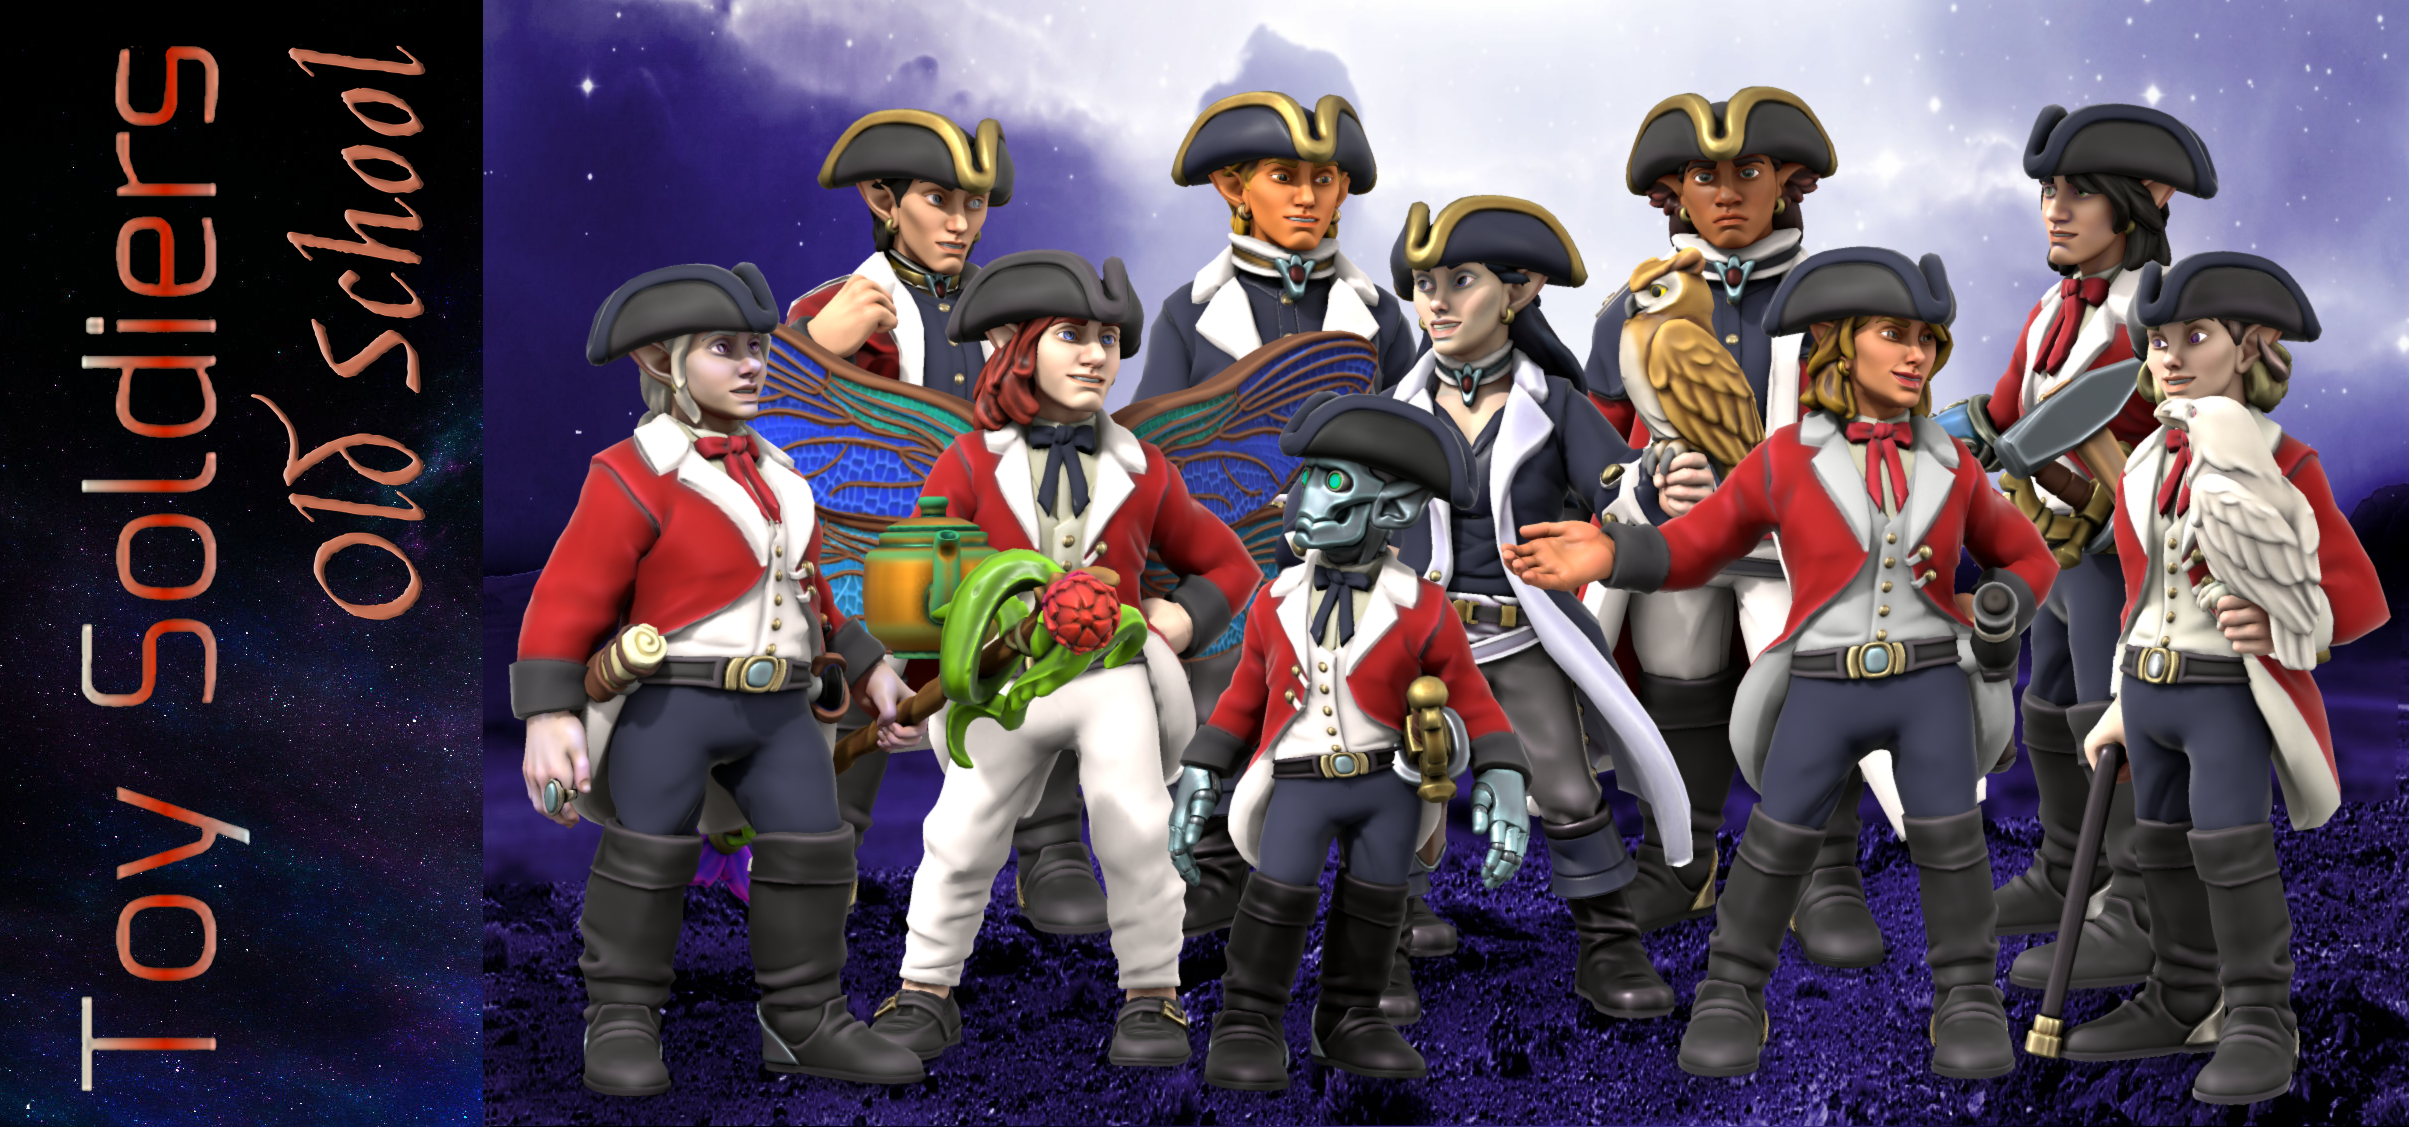 Toy Soldiers Group Portrait 1.png